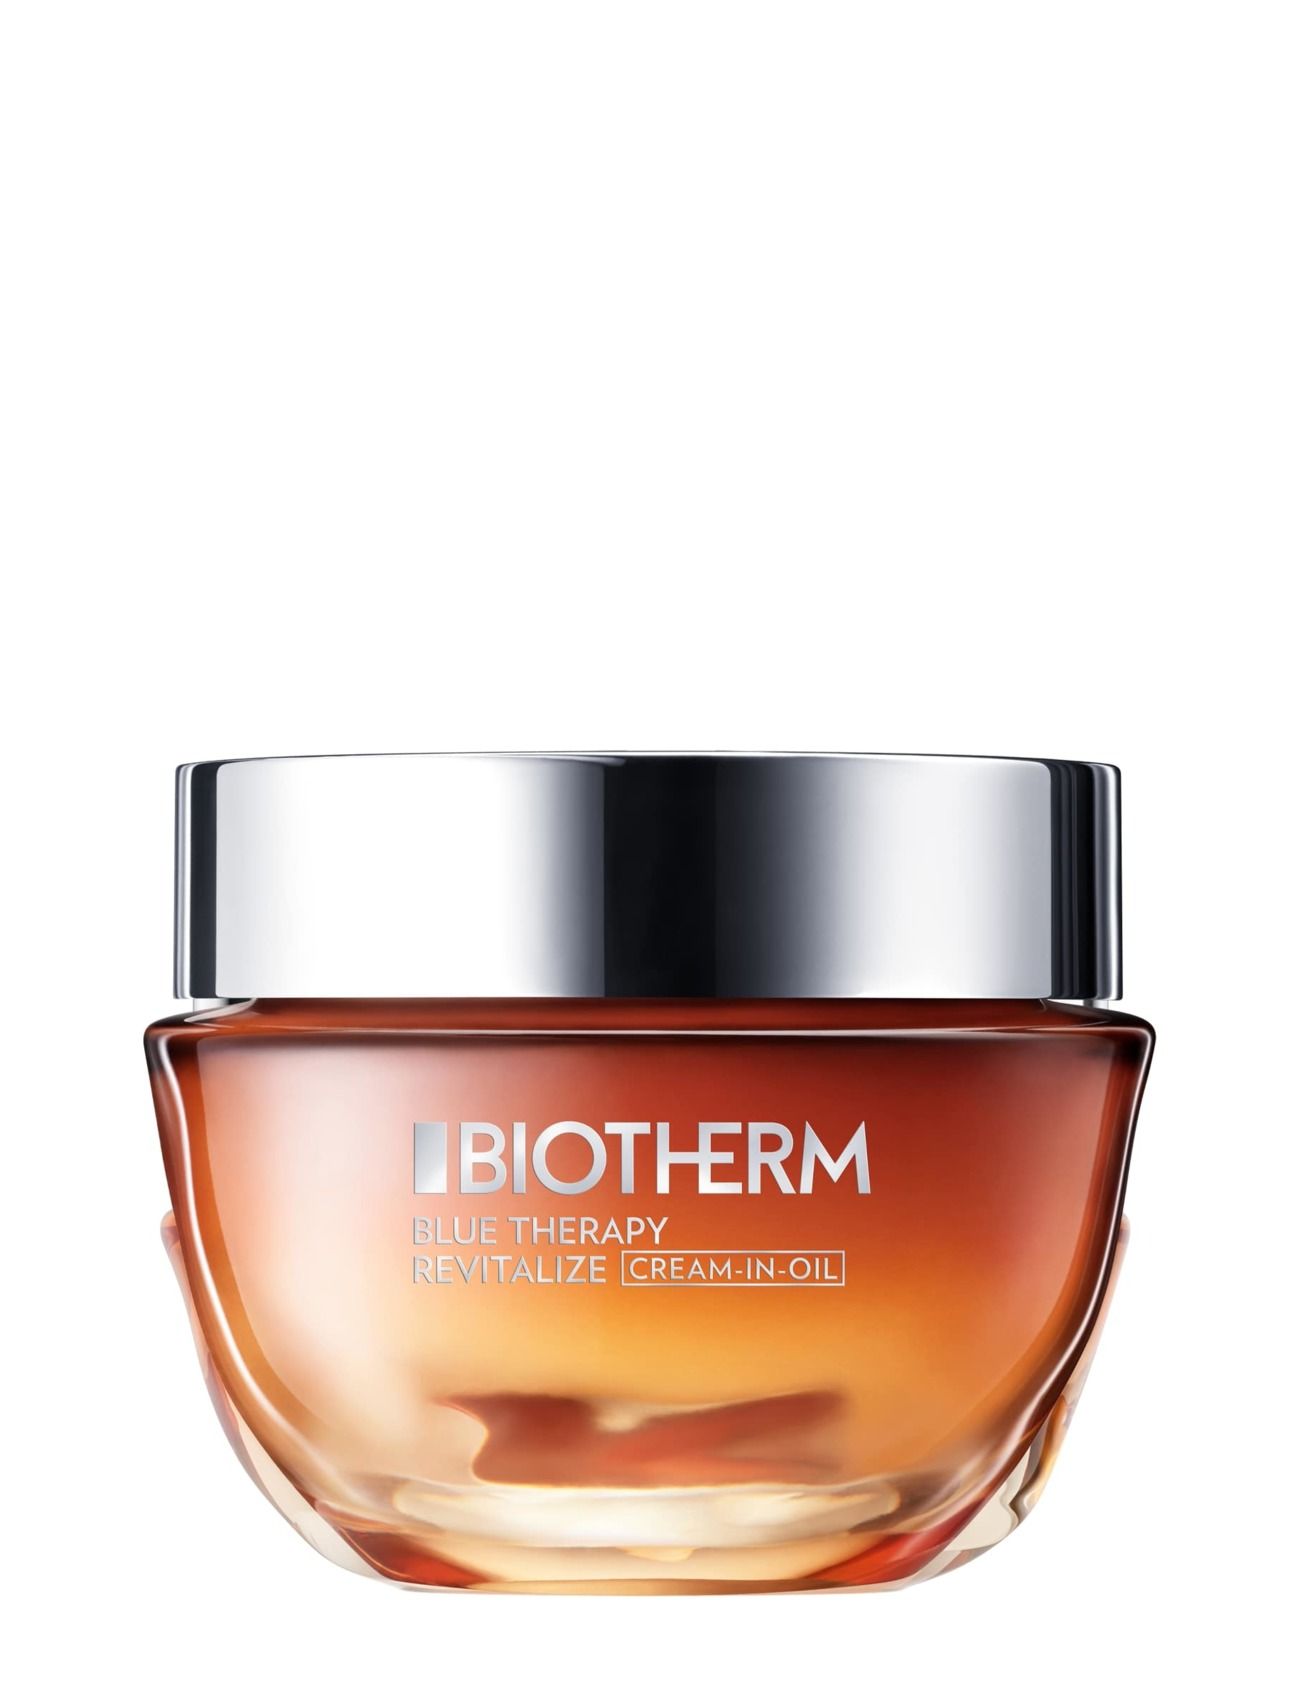 Biotherm "Blue Therapy Revitalize Cream-In-Oil Fugtighedscreme Dagcreme Nude Biotherm"